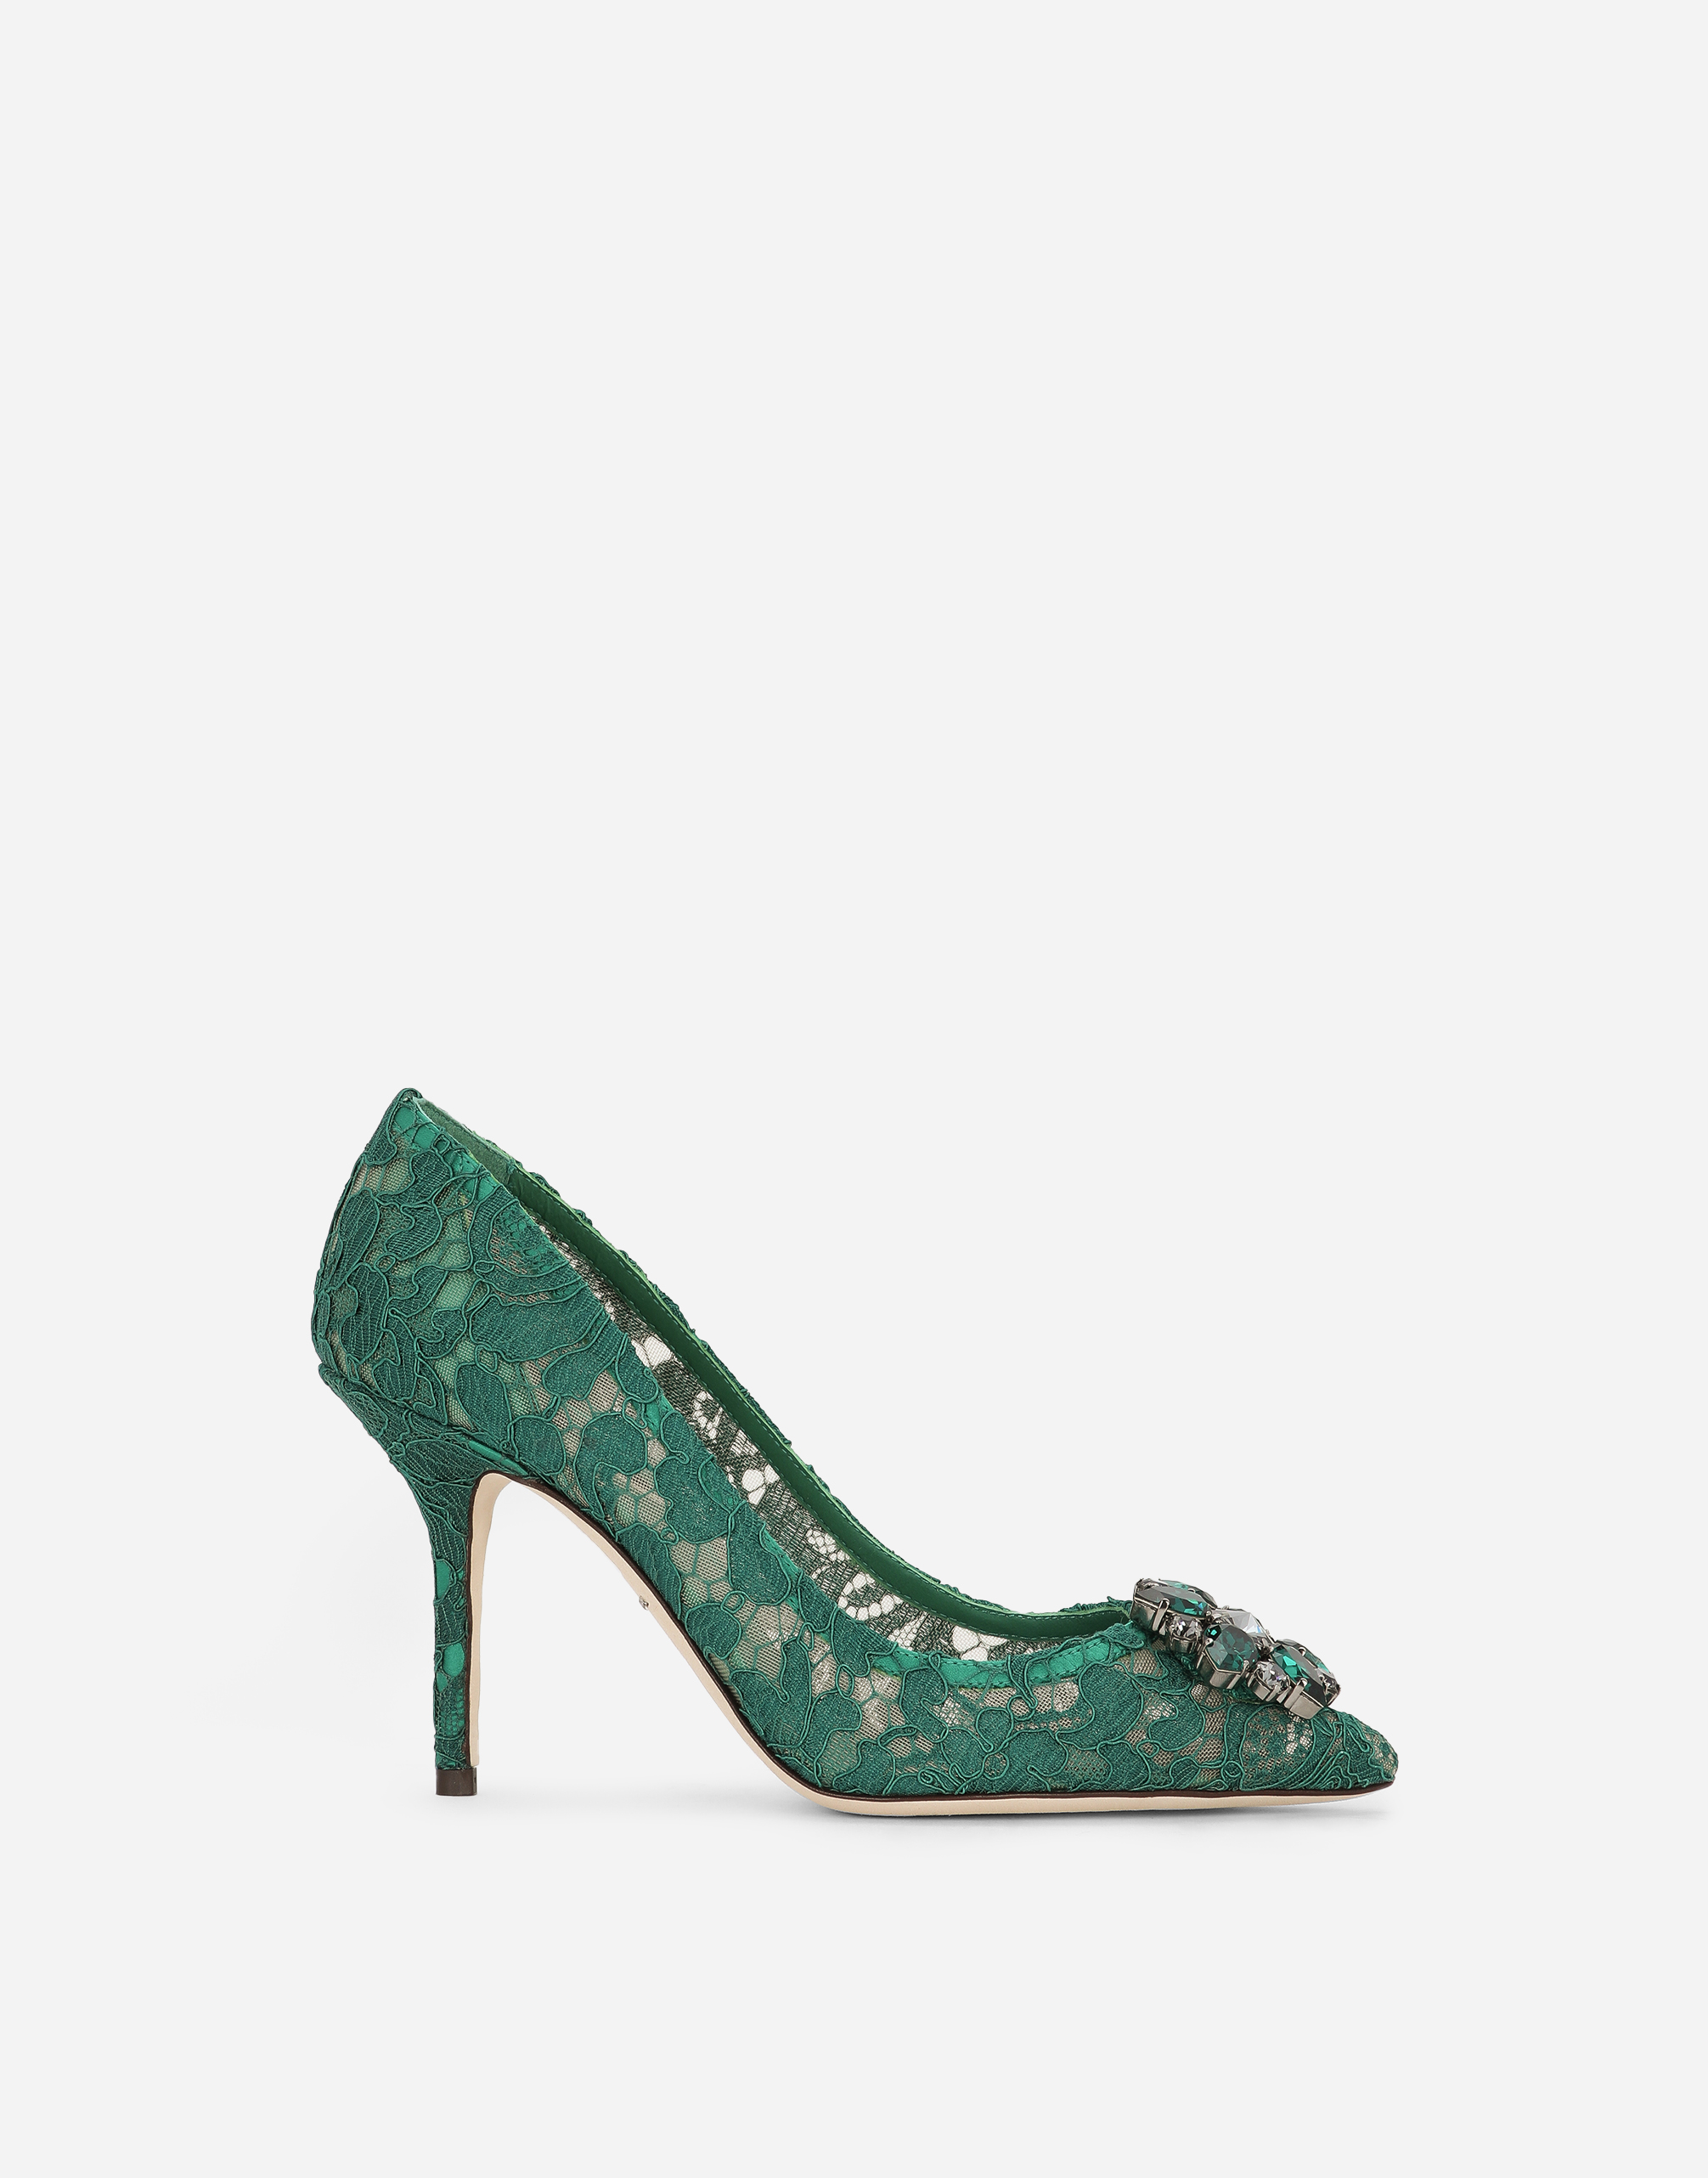 Lace rainbow pumps with brooch detailing in Green